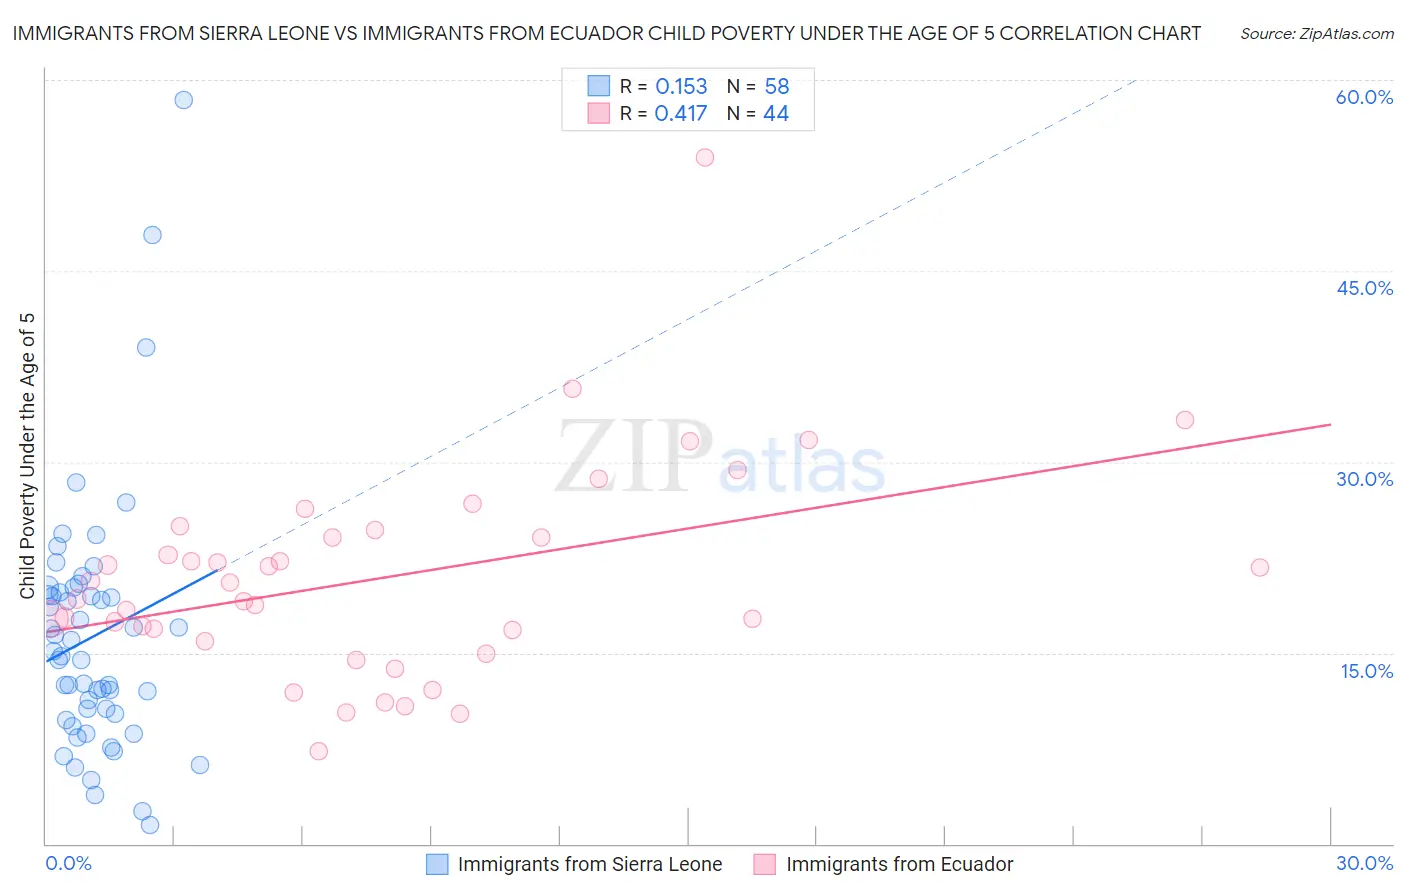 Immigrants from Sierra Leone vs Immigrants from Ecuador Child Poverty Under the Age of 5